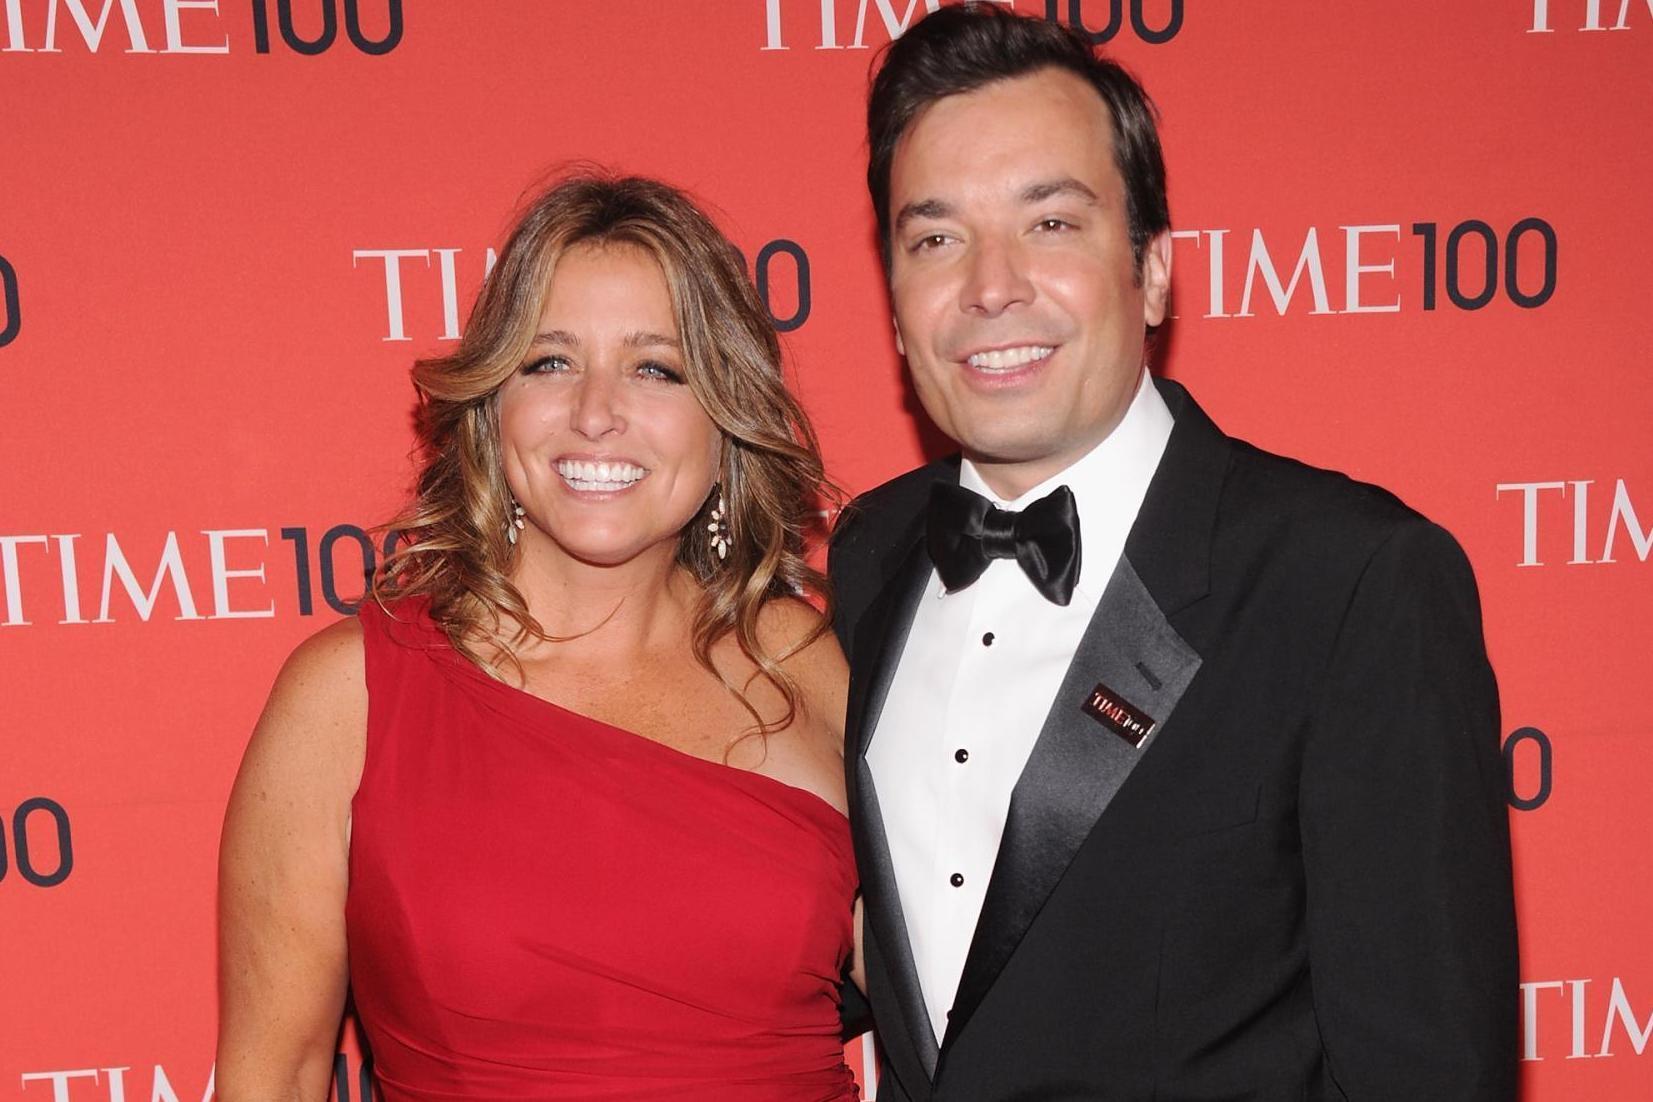 Jimmy Fallon and wife Nancy share their secrets to a successful marriage: 'Keep your sense of humour'